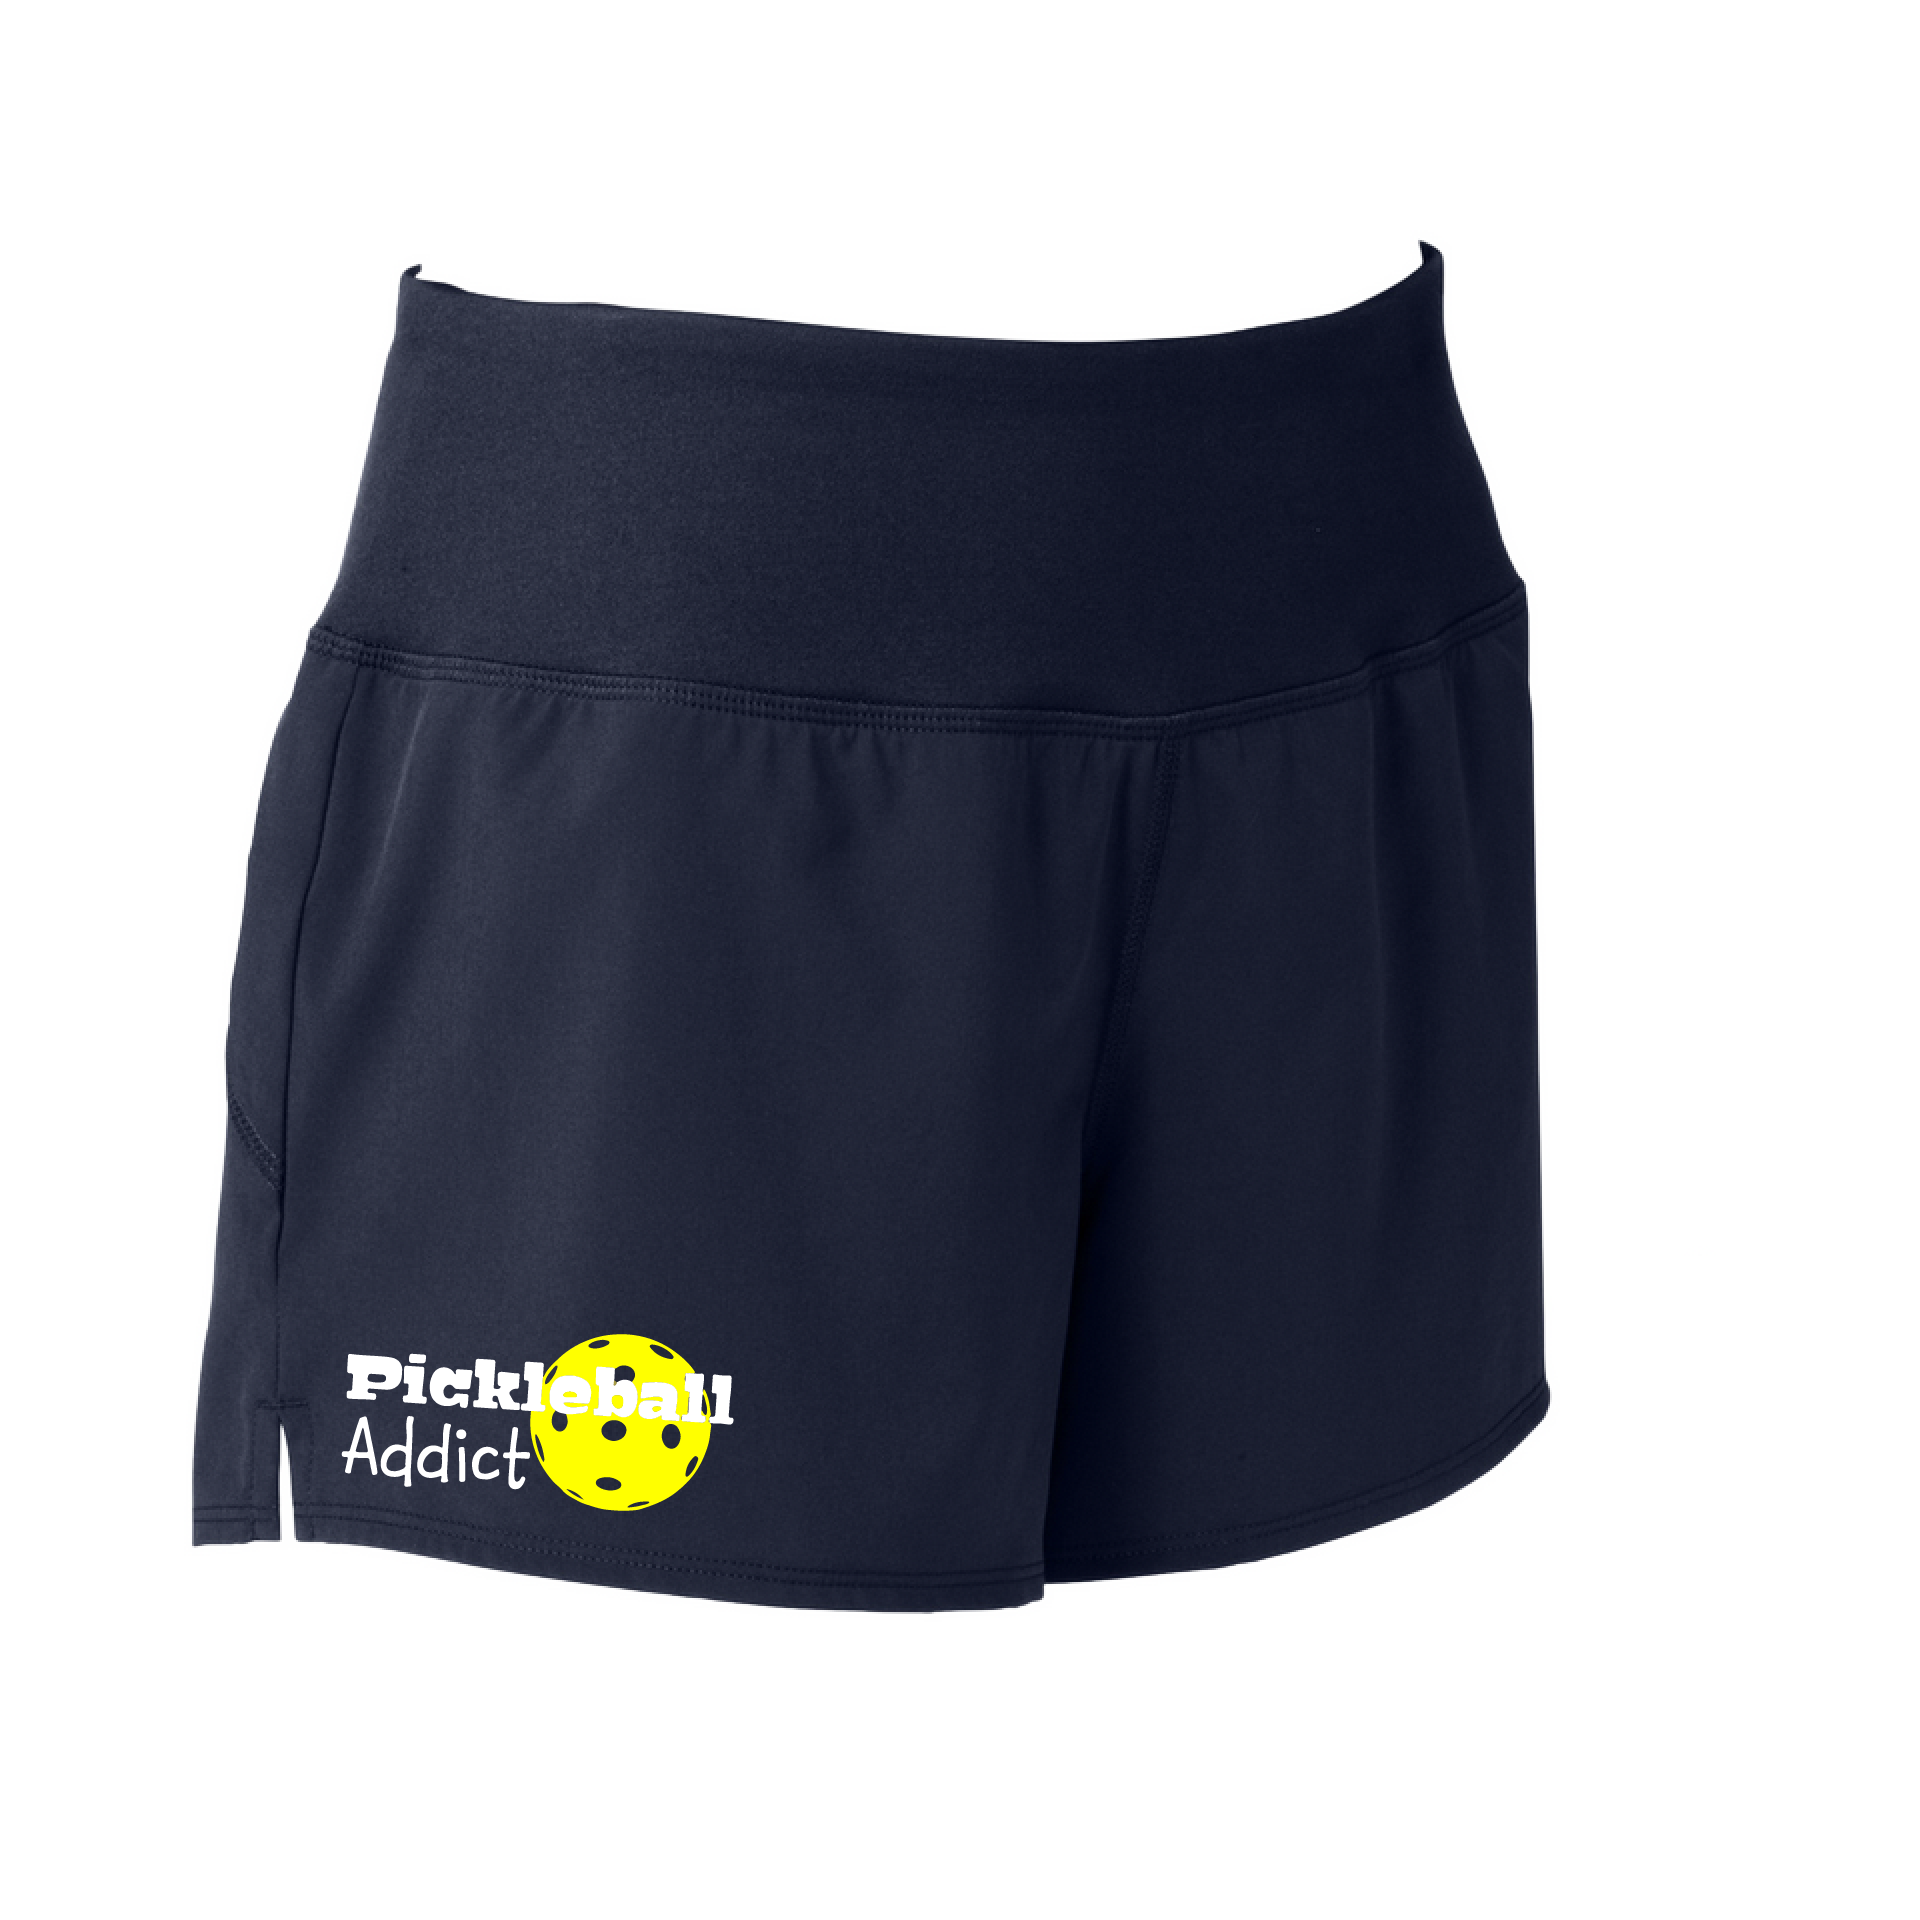 Pickleball Shorts Designs: Pickleball Addict  Sport Tek women’s repeat shorts come with built-in cell phone pocket on the exterior of the waistband. You can also feel secure knowing that no matter how strenuous the exercise, the shorts will remain in place (it won’t ride up!). These shorts are extremely versatile and trendy. Transition from the Pickleball court to running errands smoothly.